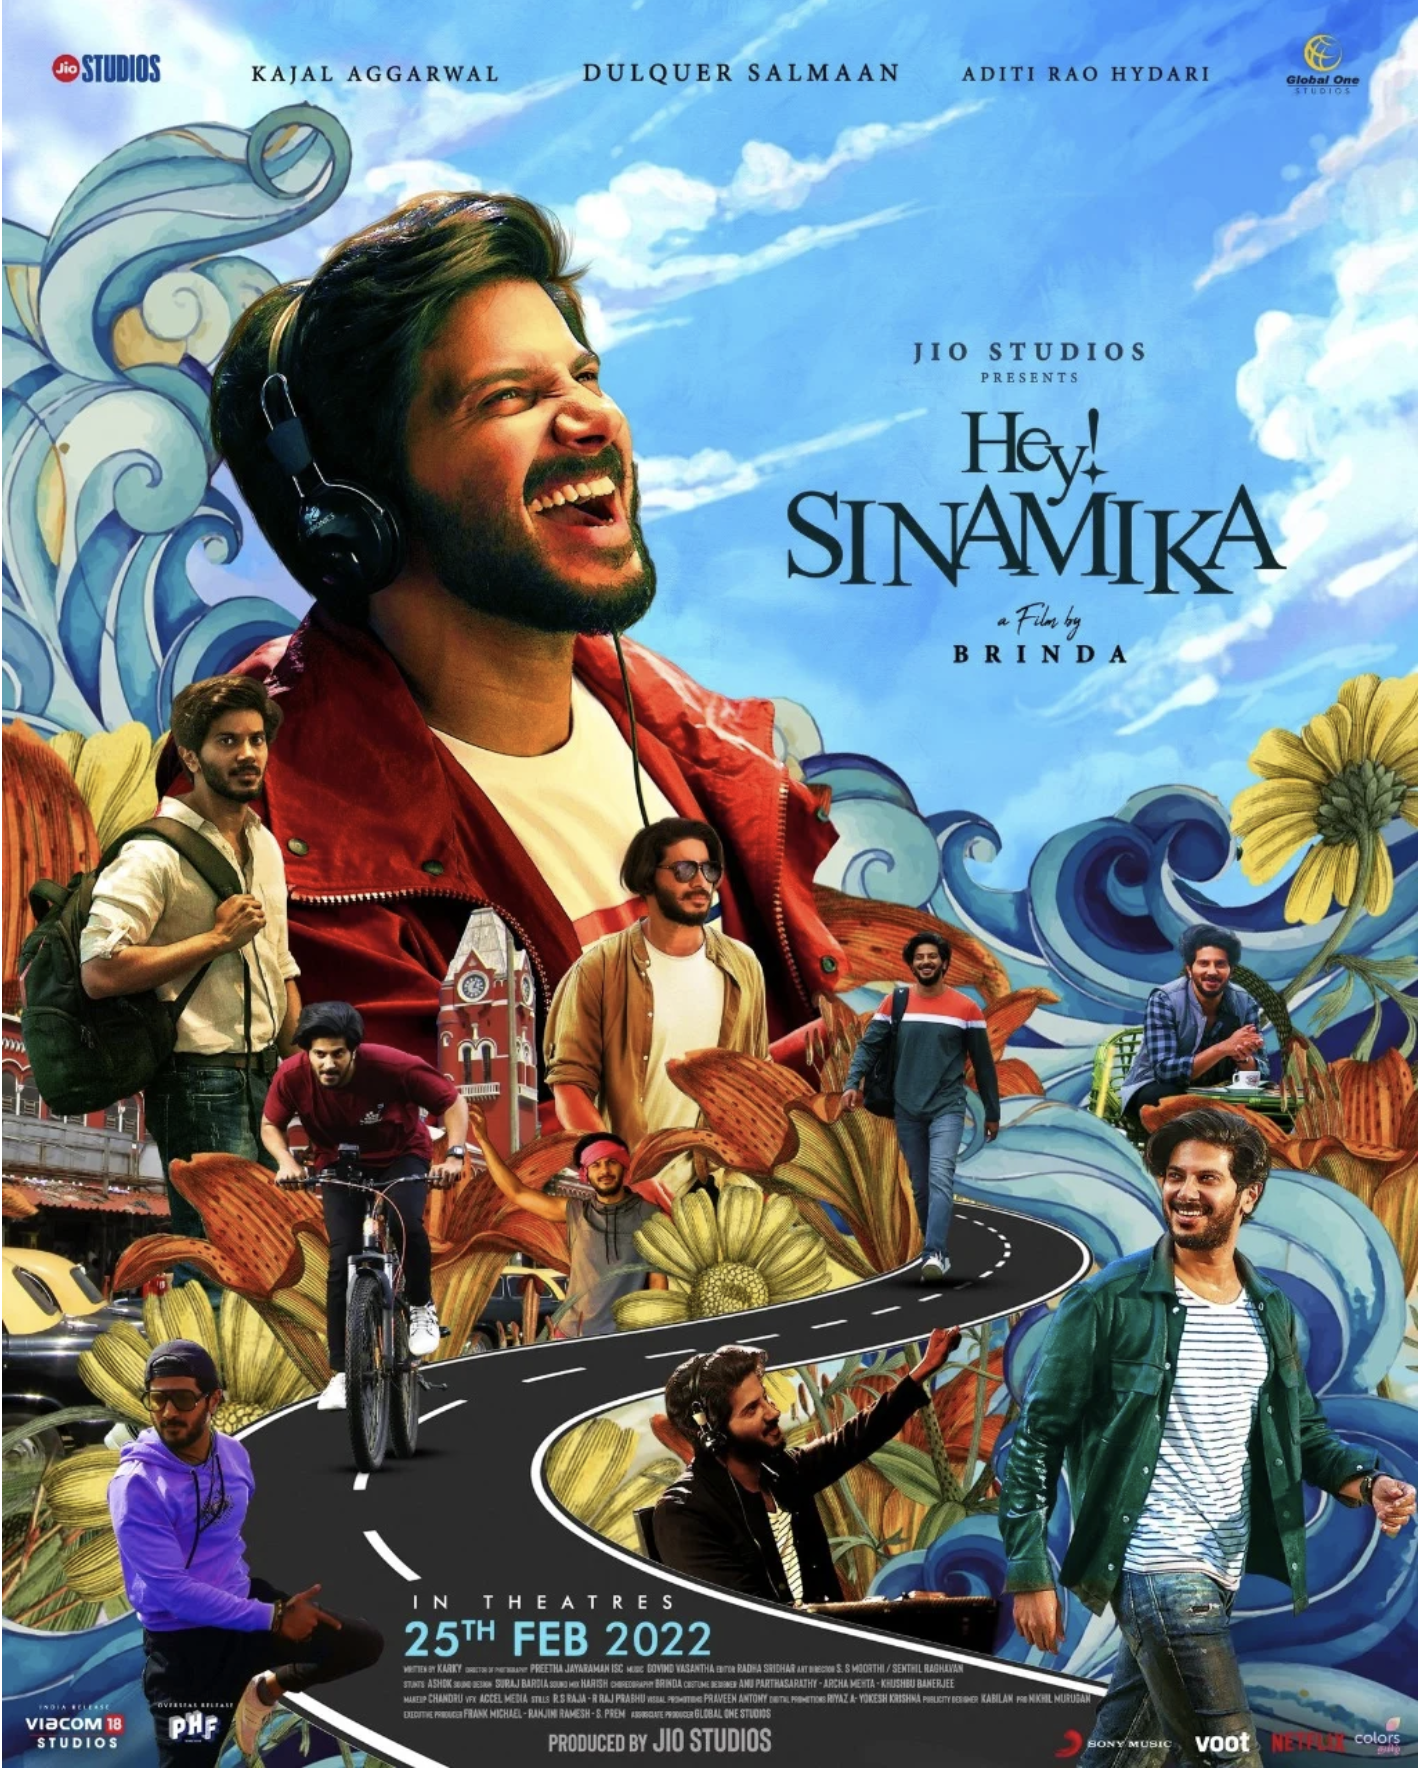 Hey Sinamika new first look poster to be released today evening.